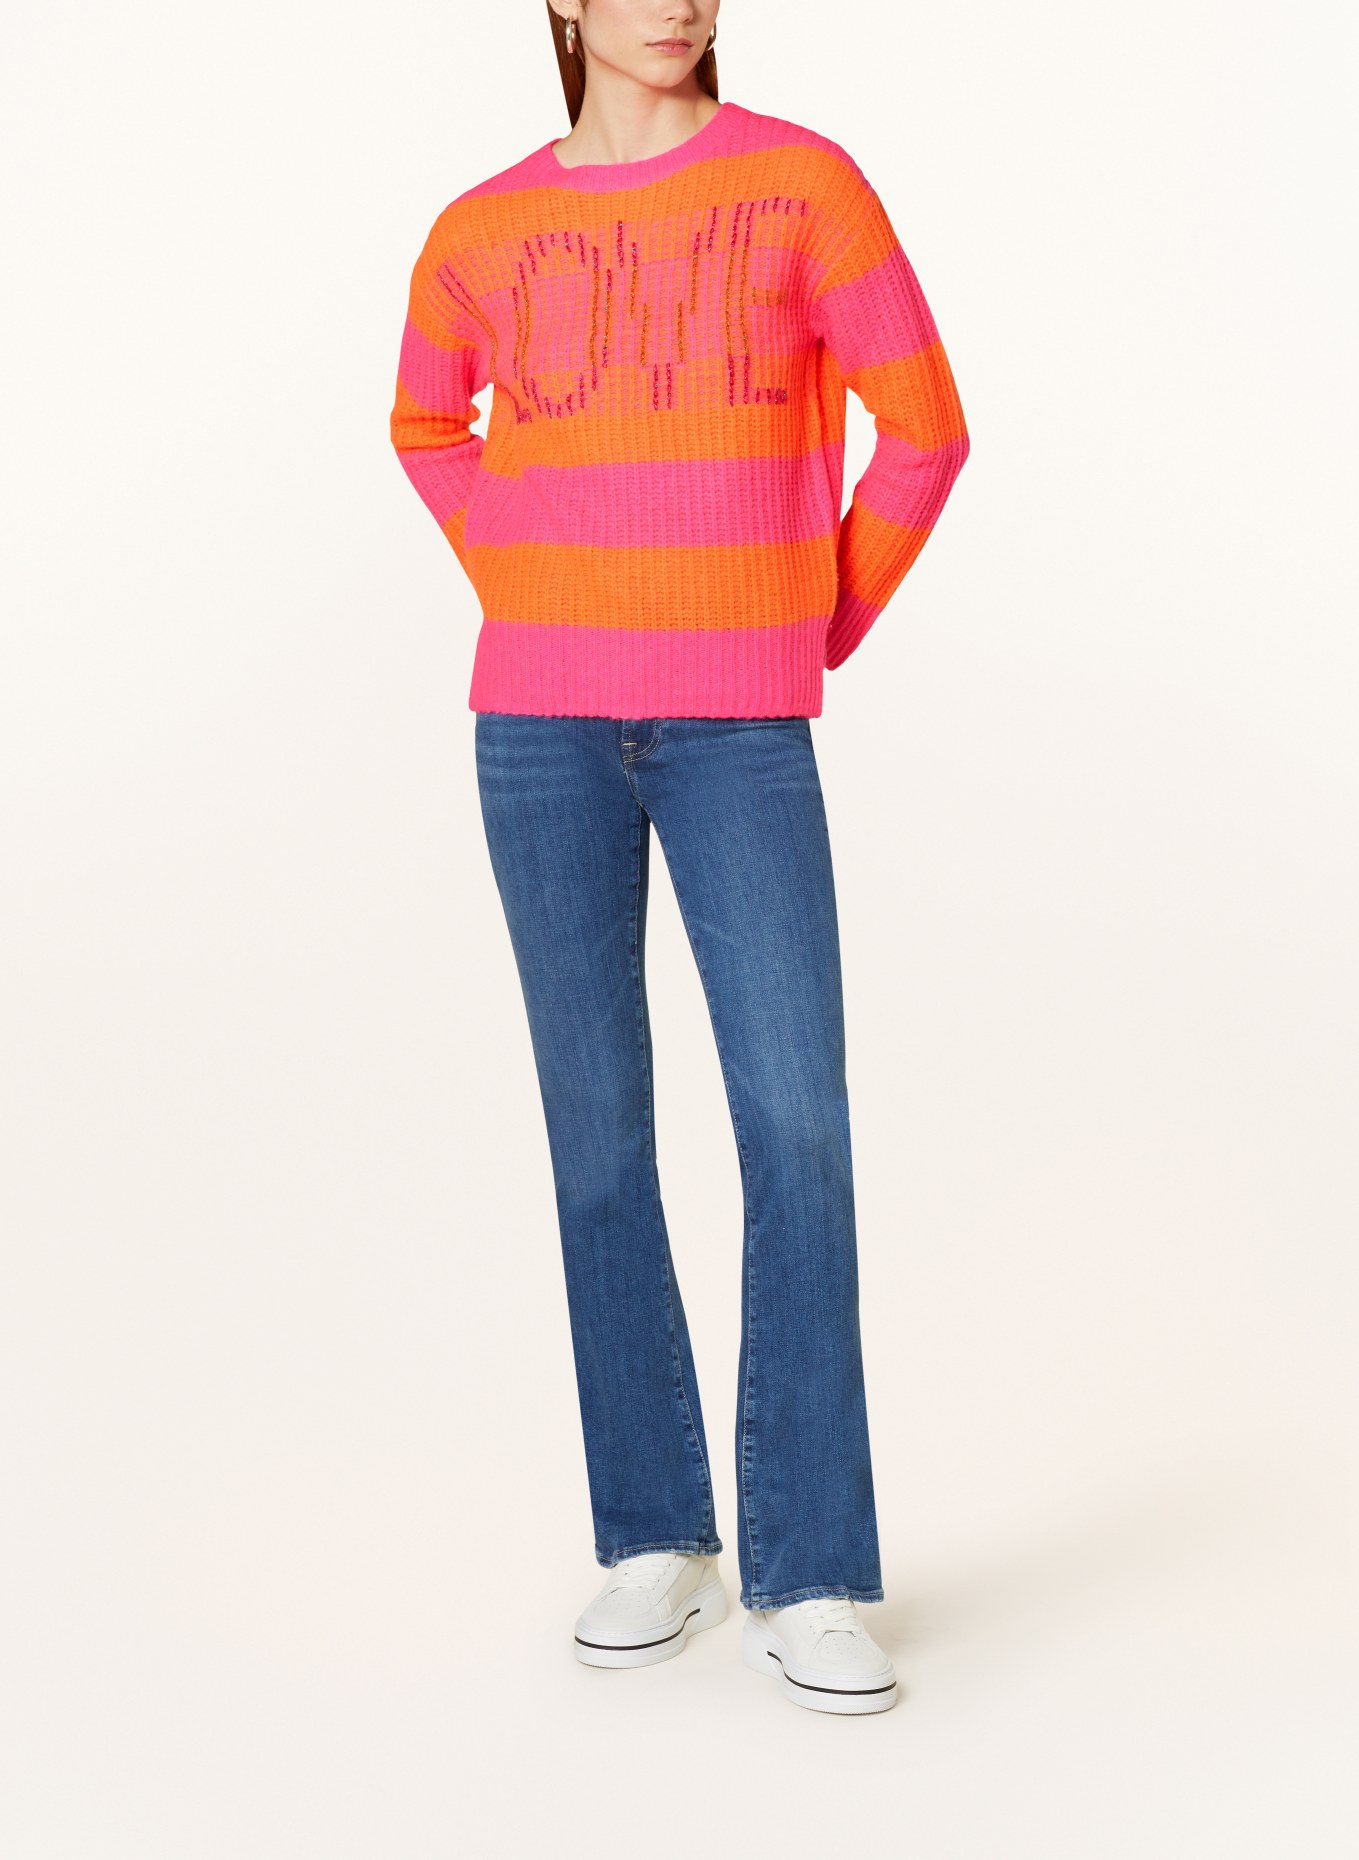 Princess GOES HOLLYWOOD Sweater with glitter thread, Color: PINK/ ORANGE (Image 2)